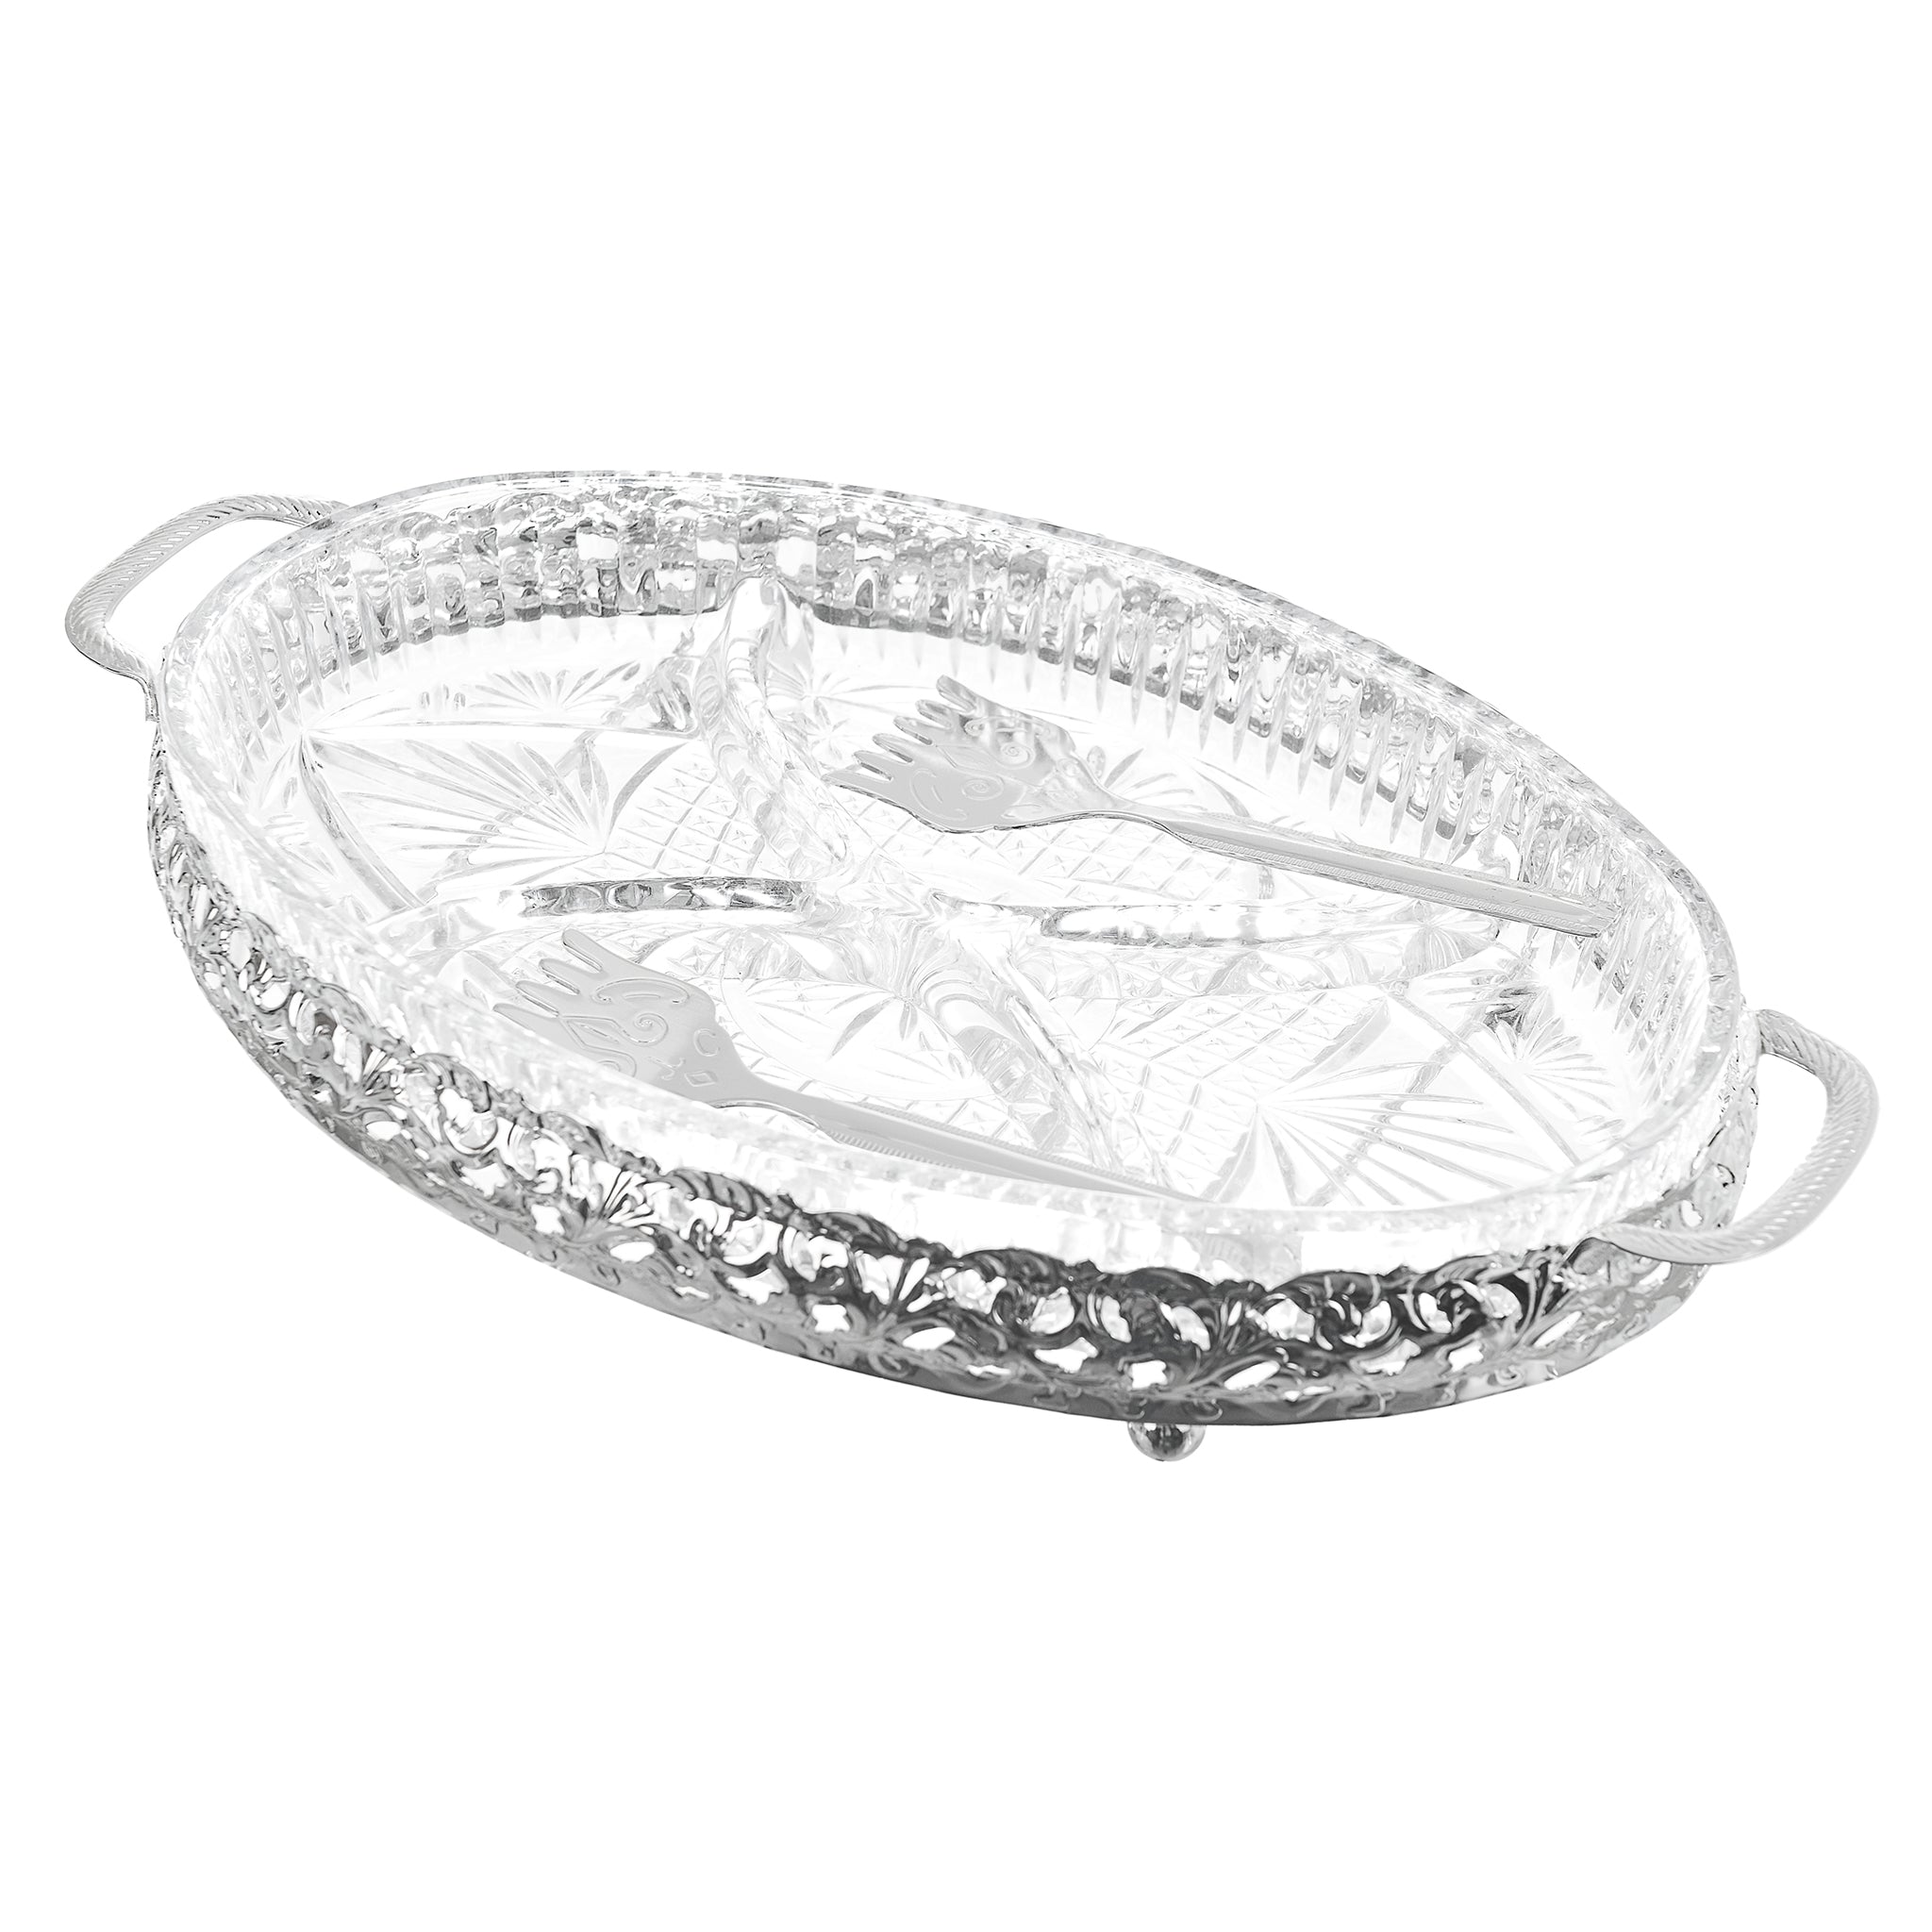 Queen Anne - Oval Hors d'oeuvre 4 Parts with 2 Serving Forks - Silver Plated Metal & Glass - 31x20cm - 26000345